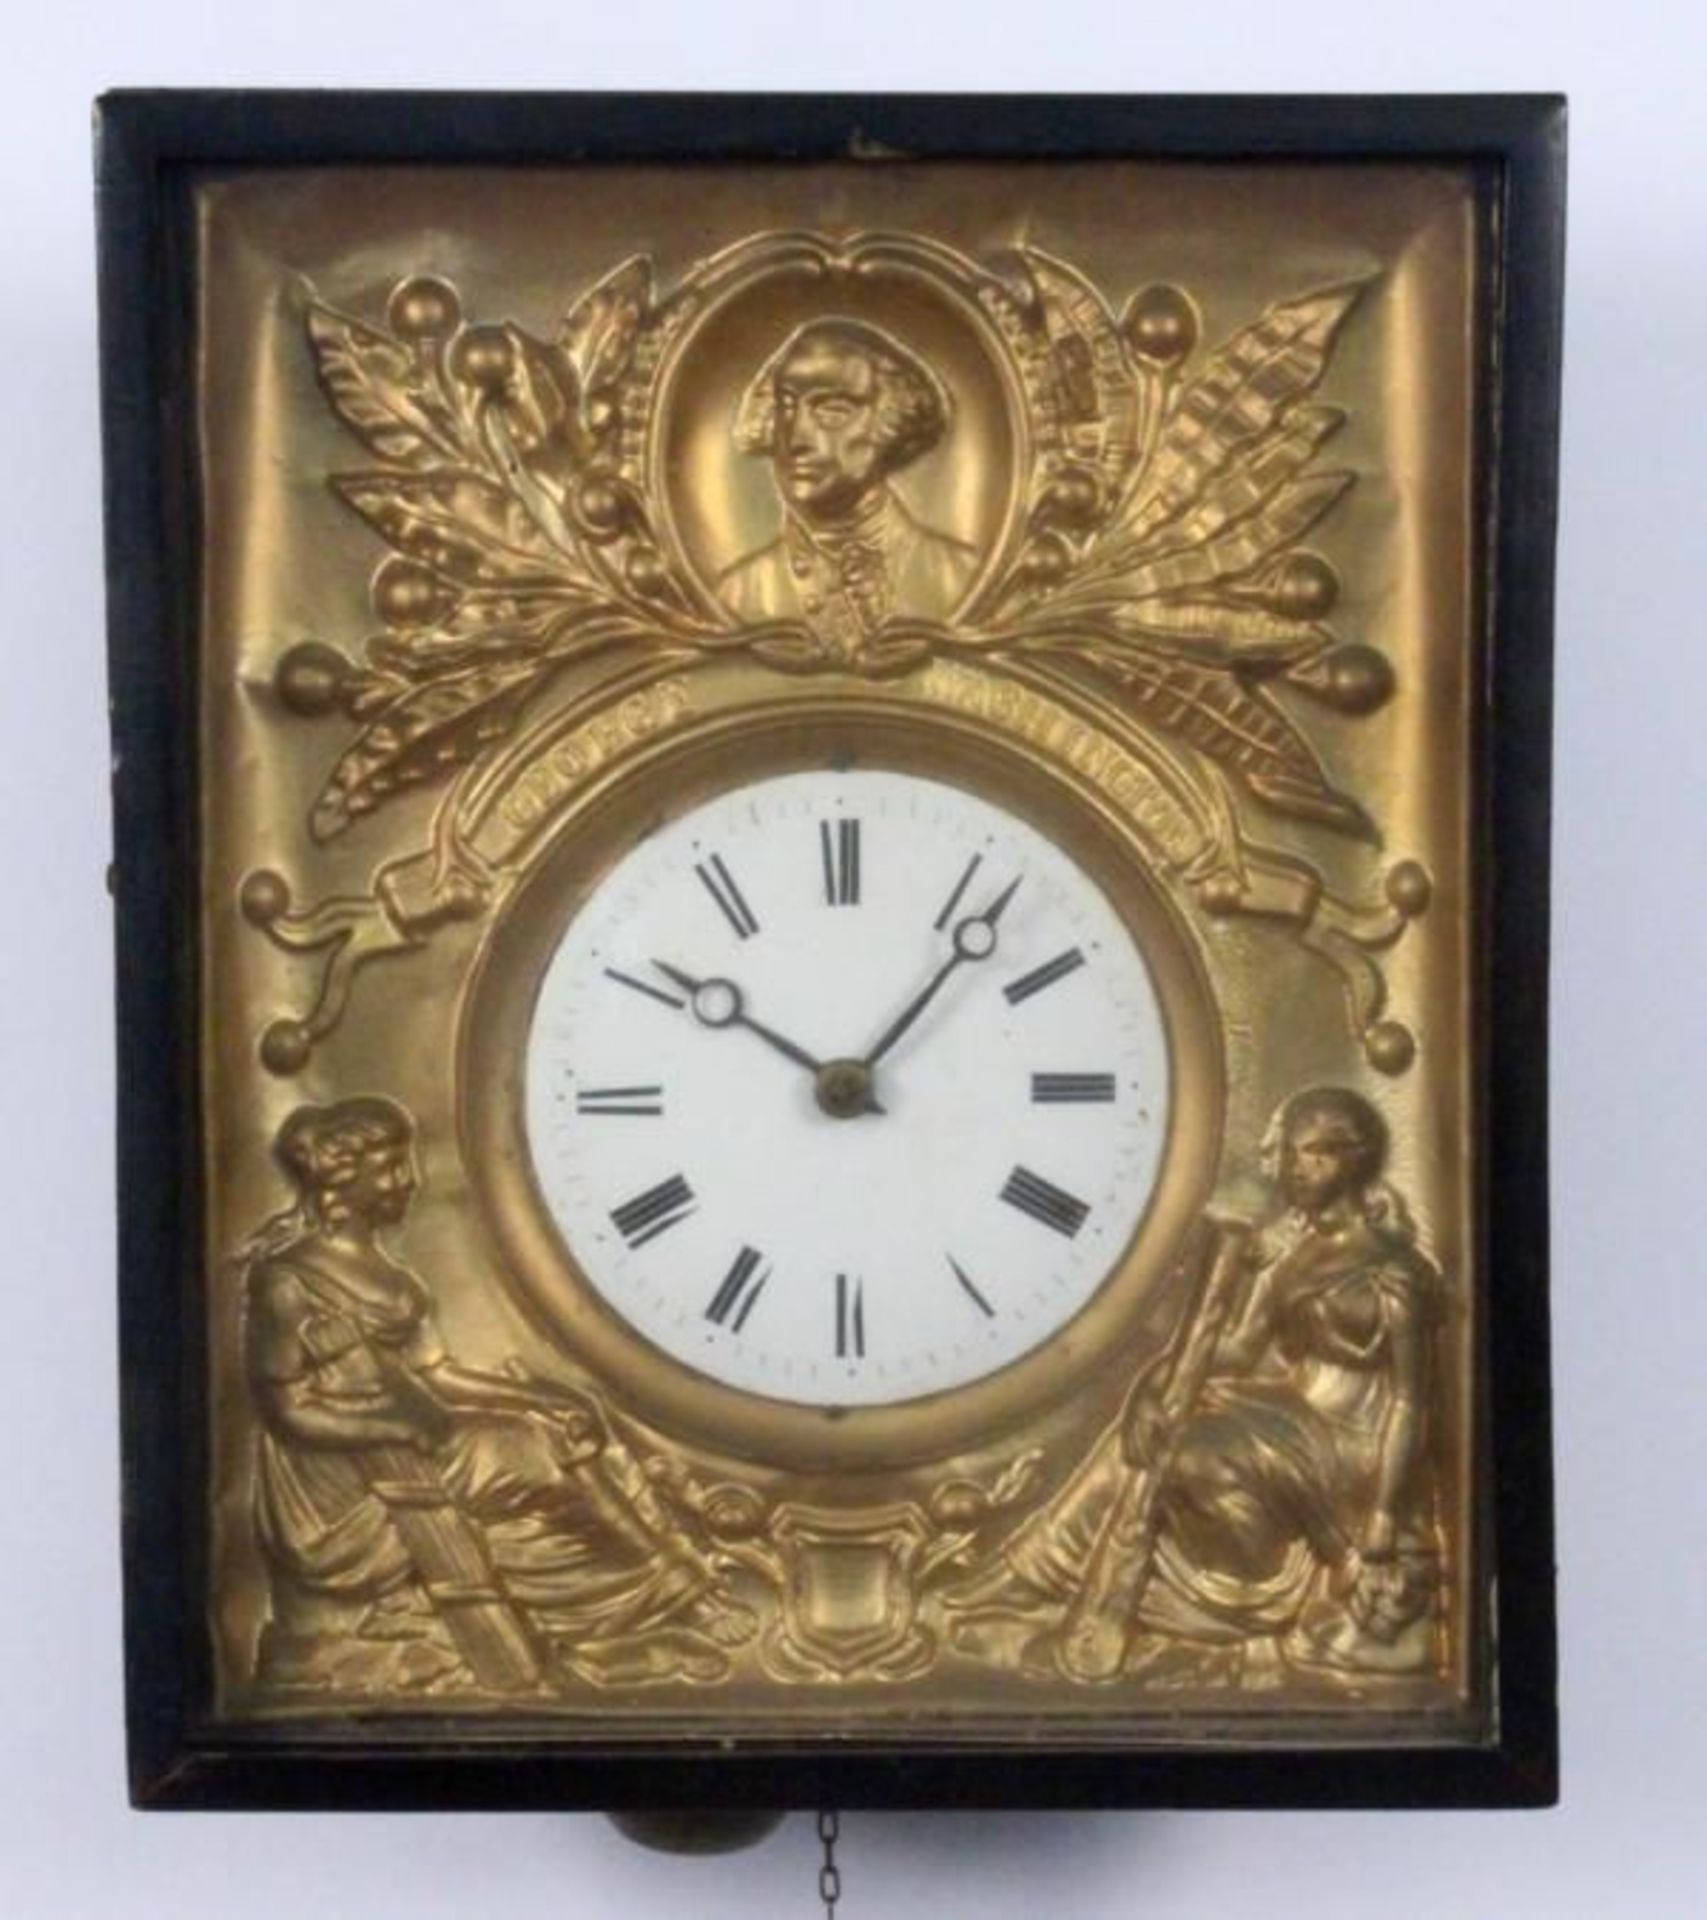 A BLACK FOREST WALL CLOCK 19th century, for the American market Wooden case with glass front, gilded